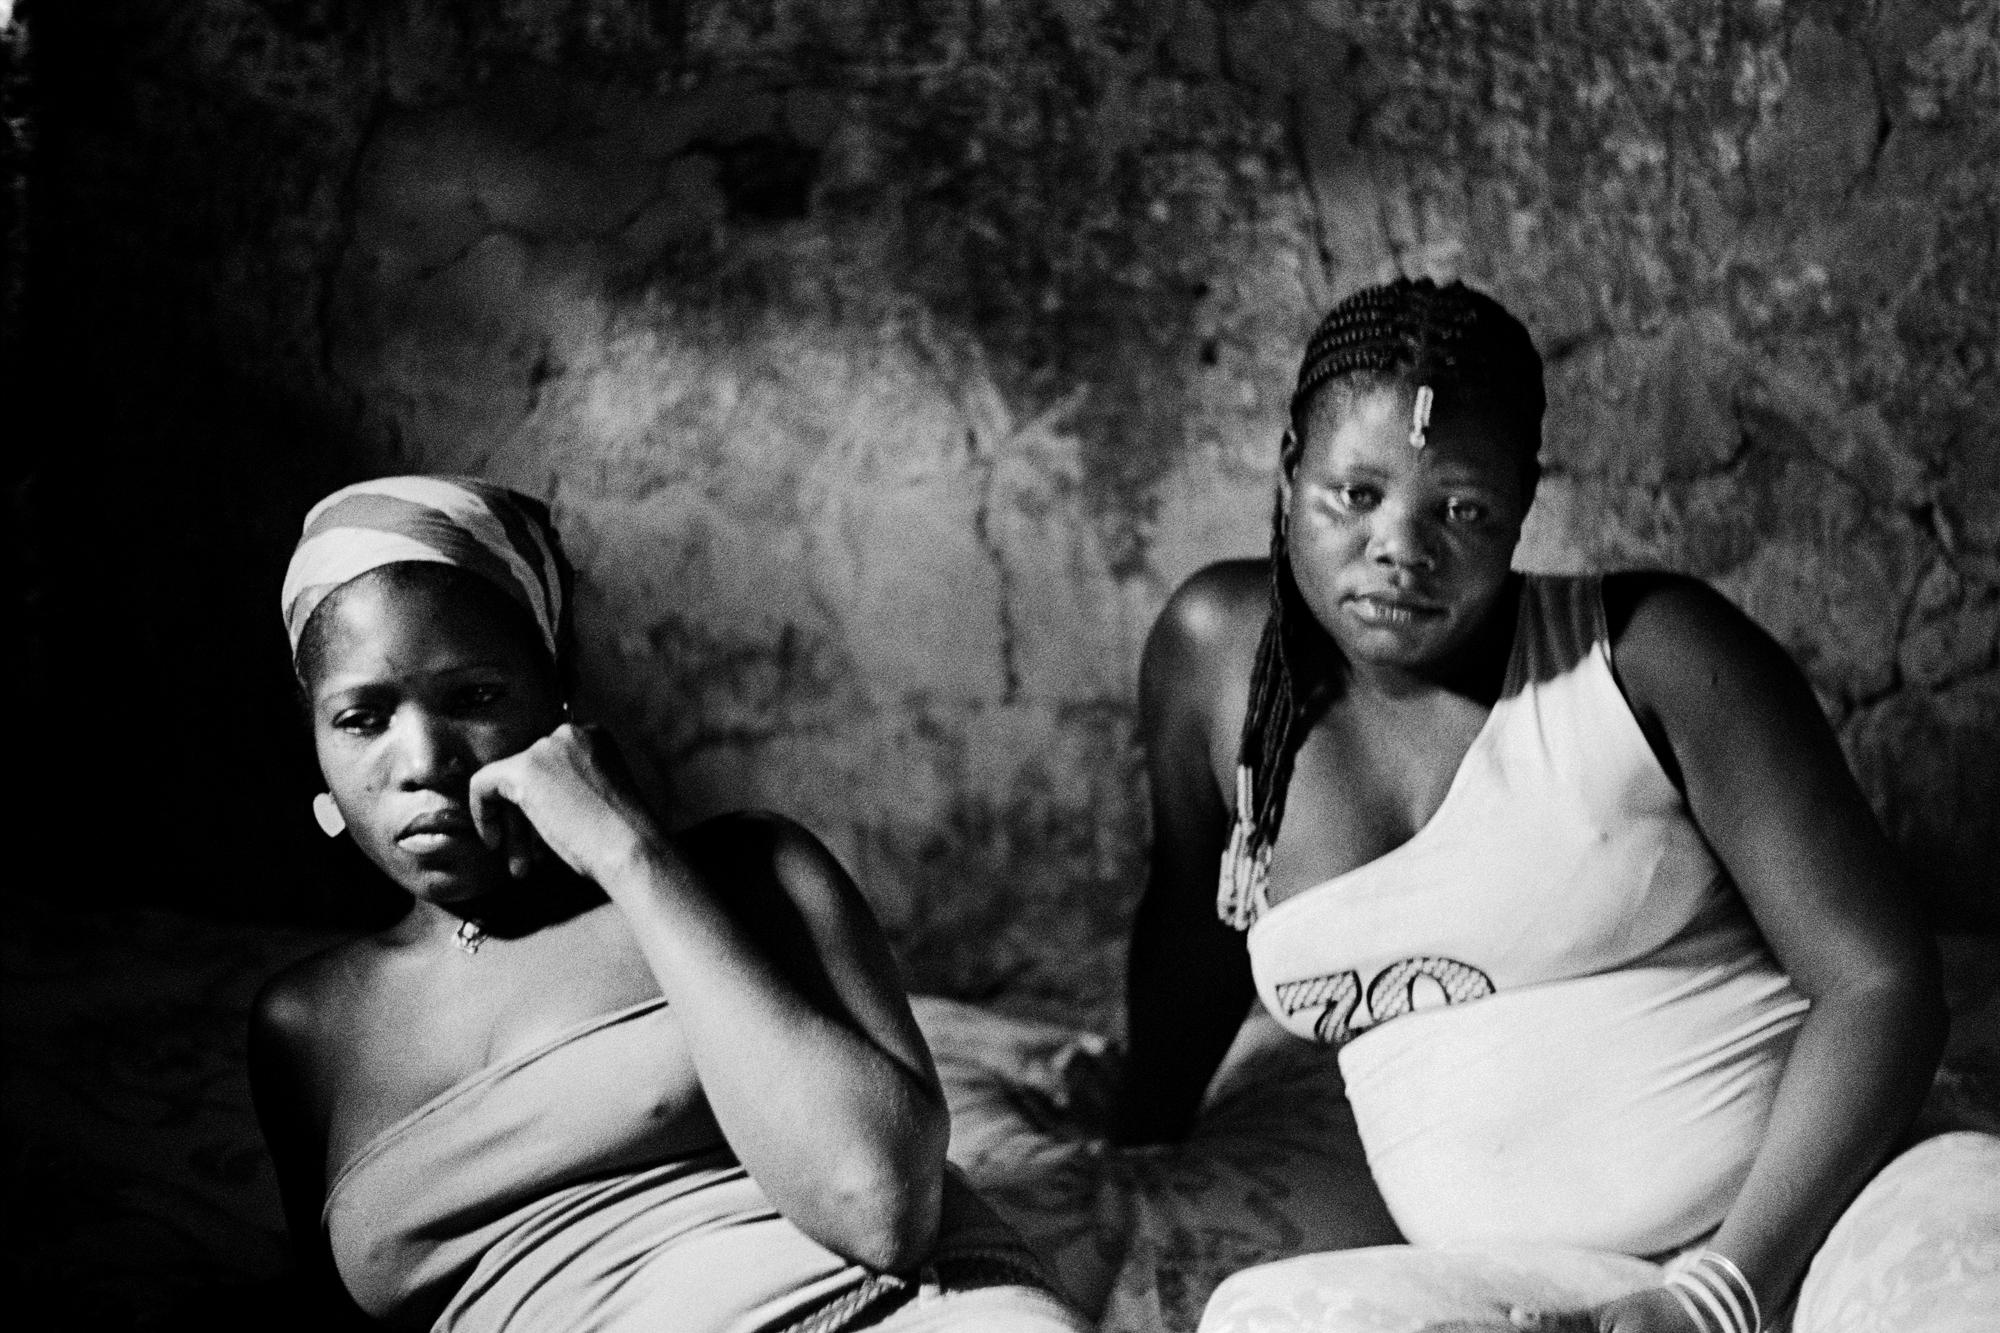 Angola - ANGOLA Malanje Two commercial sex workers. Prostitution...